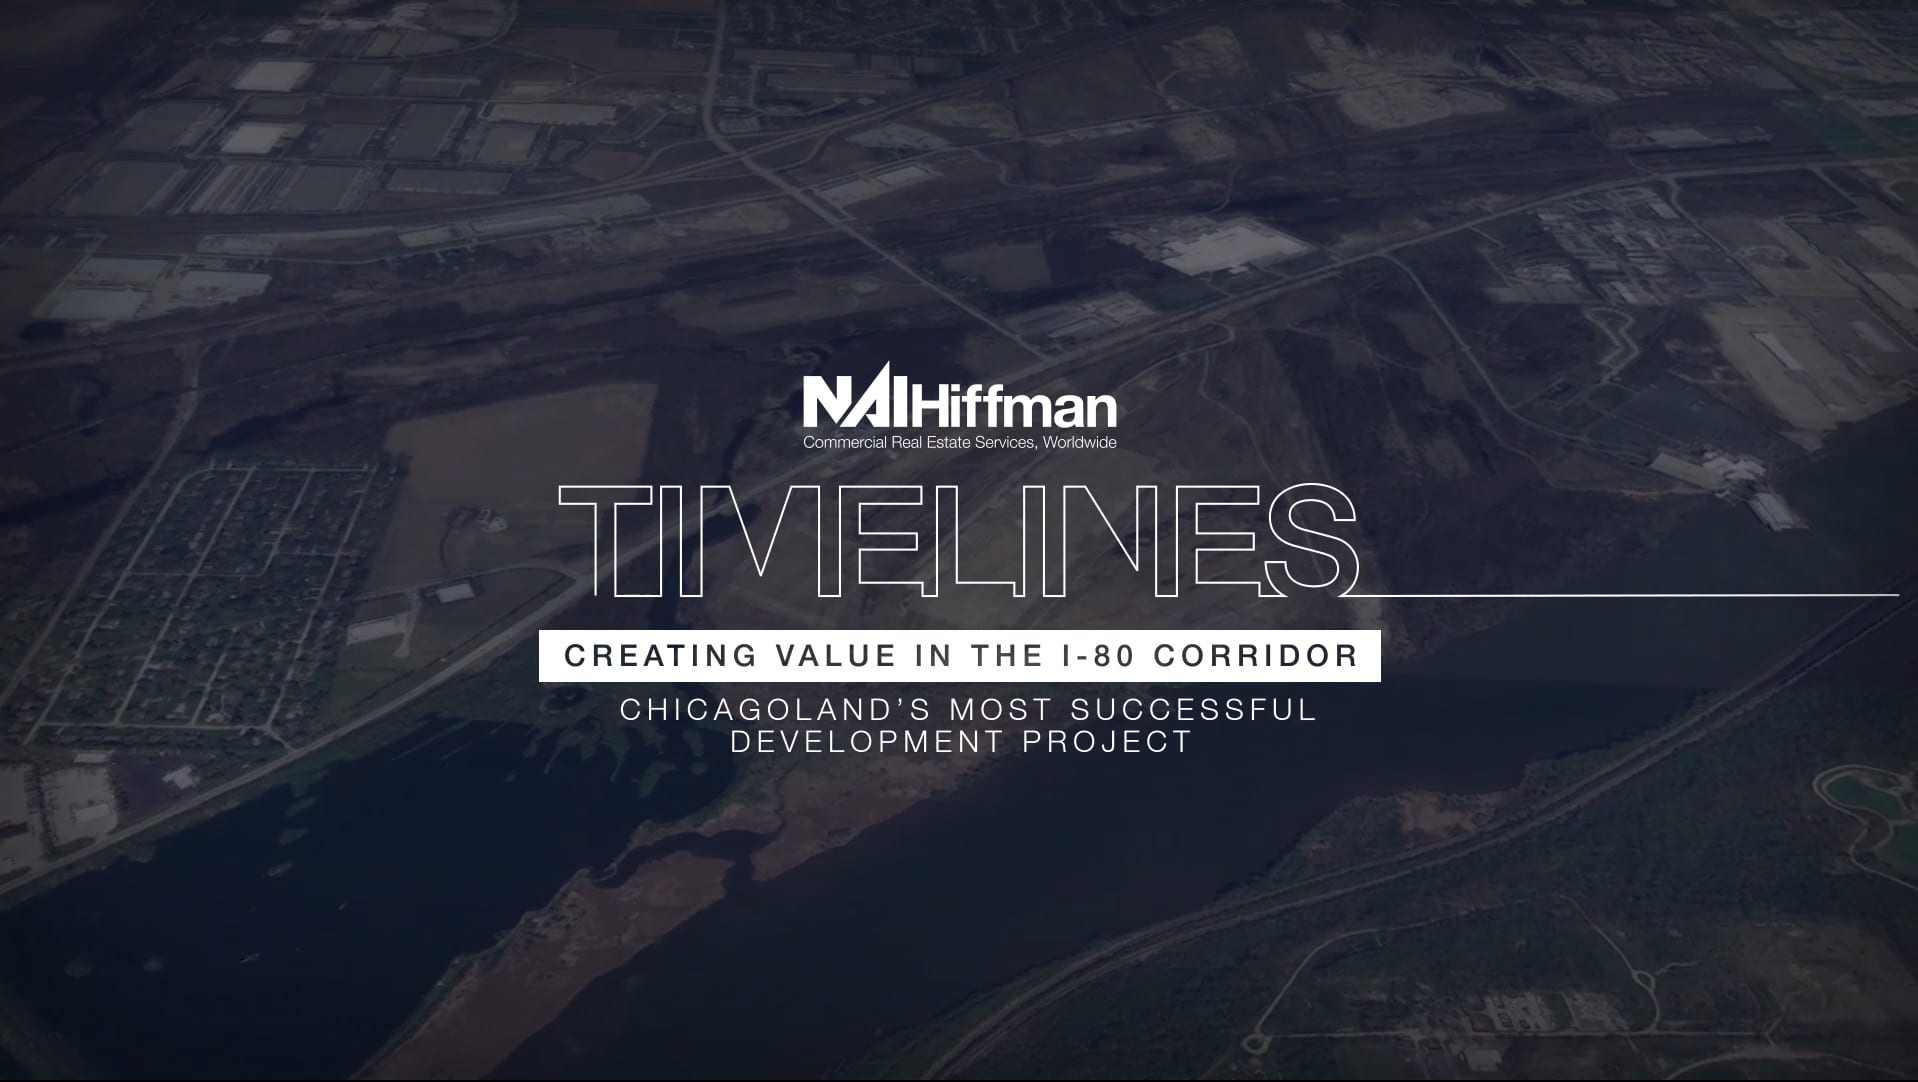 NAI Hiffman Timelines: Creating Value in Chicago’s I-80 Industrial Corridor